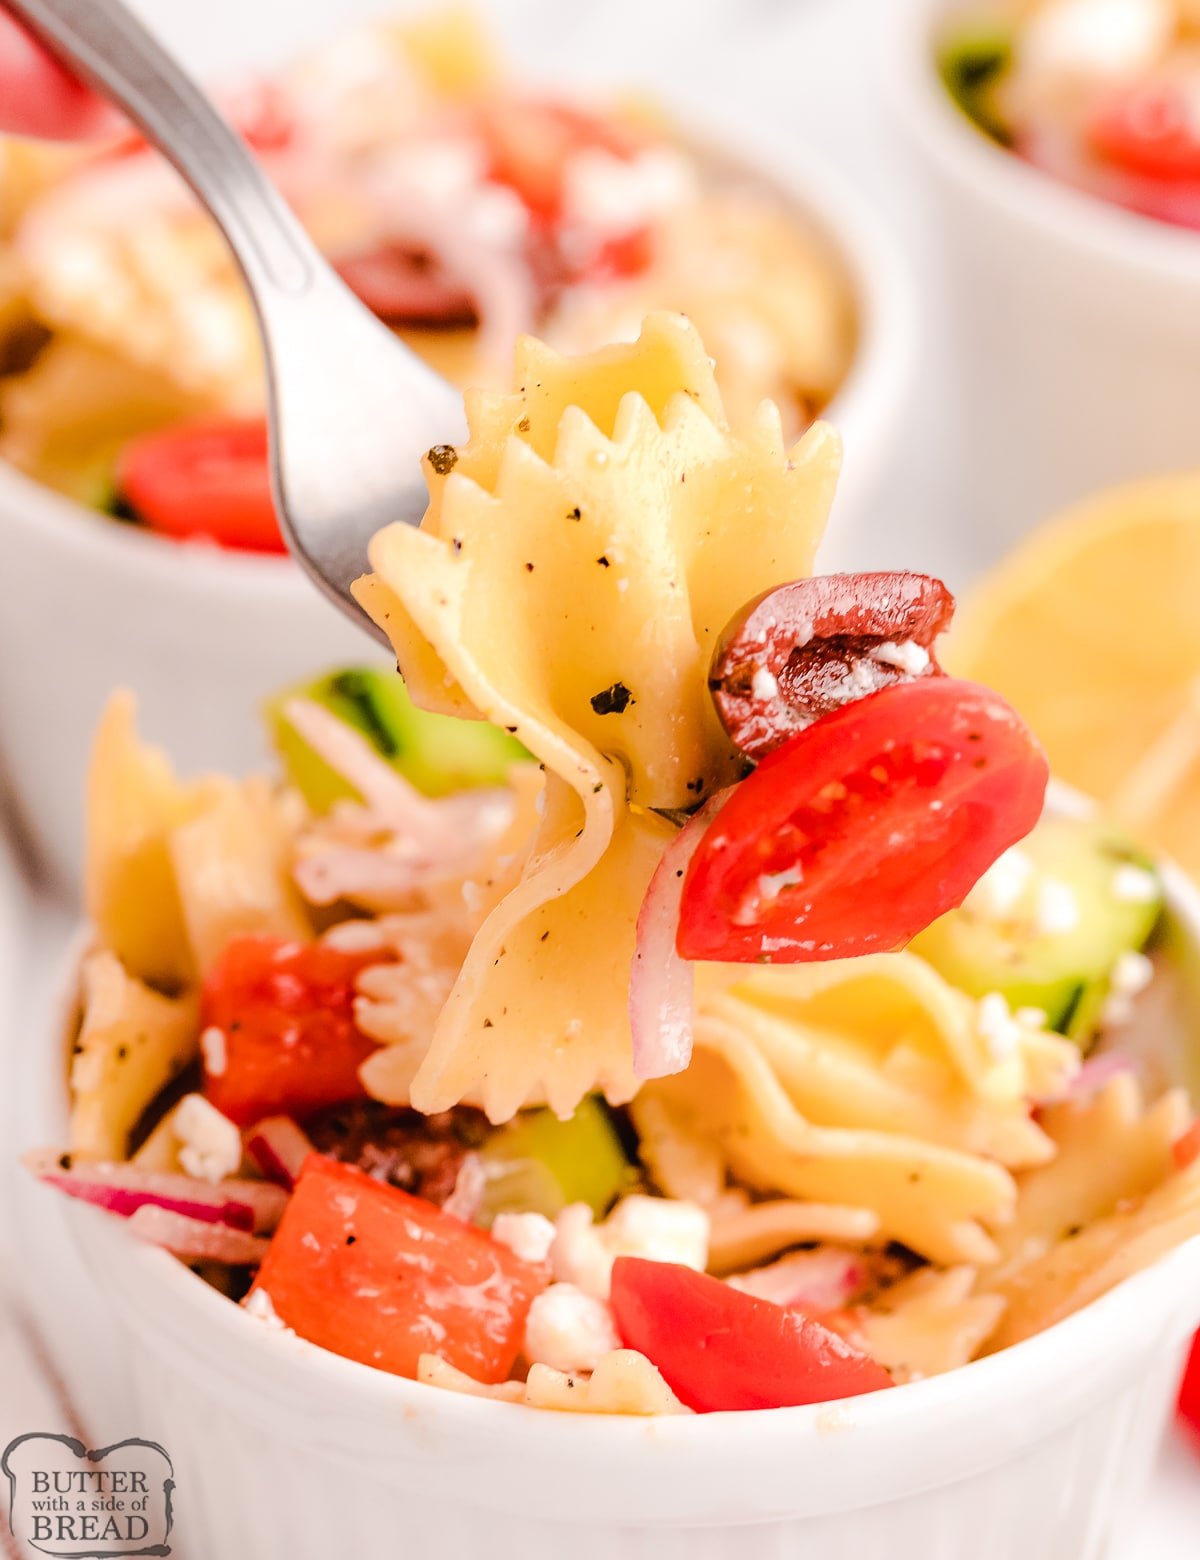 forkful of Greek pasta salad with cherry tomatoes